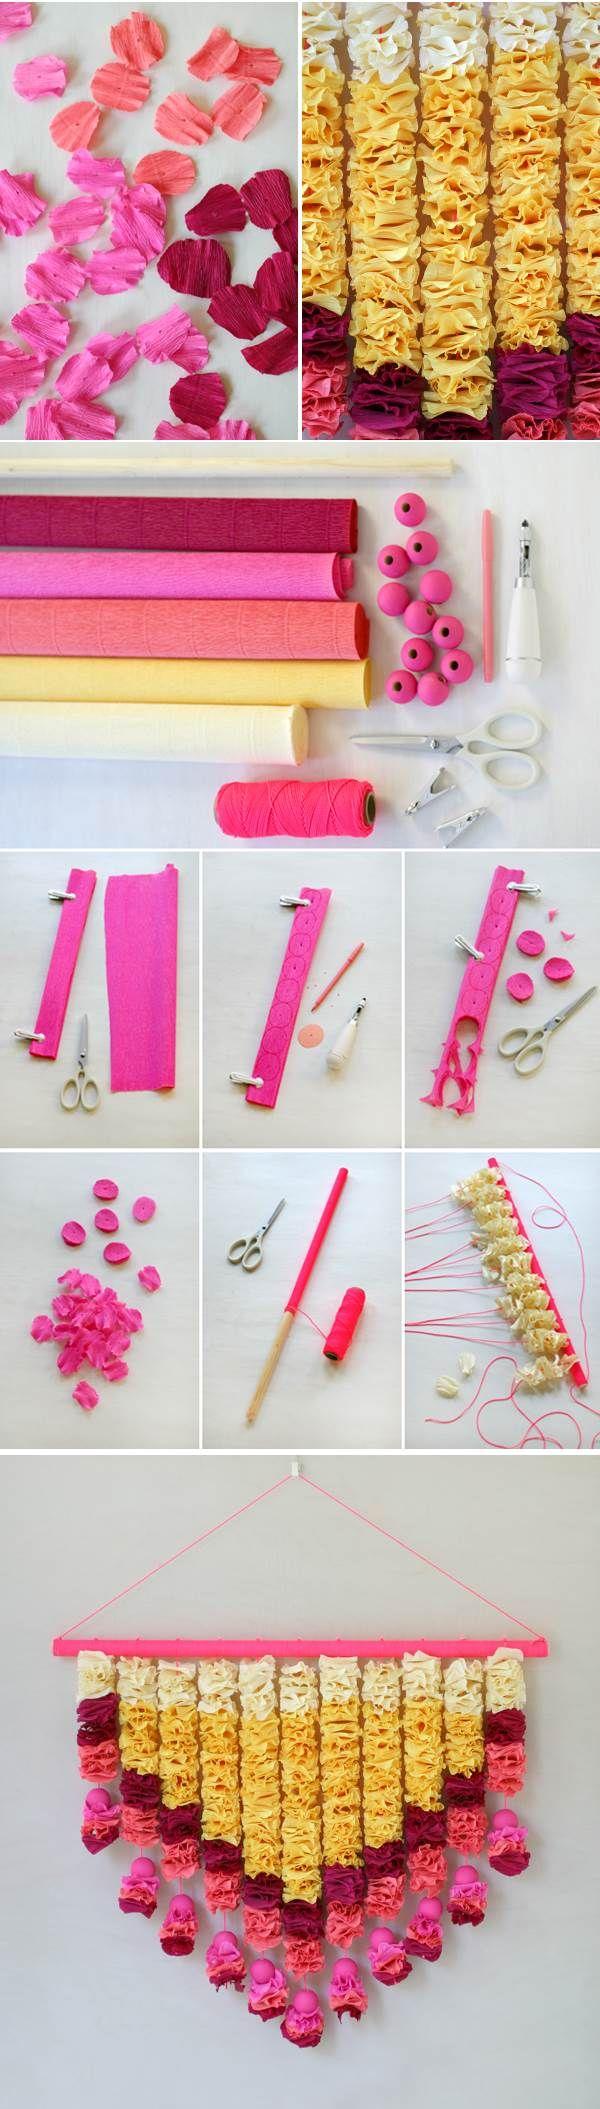 Wedding - Our Favorite Crafting Tools